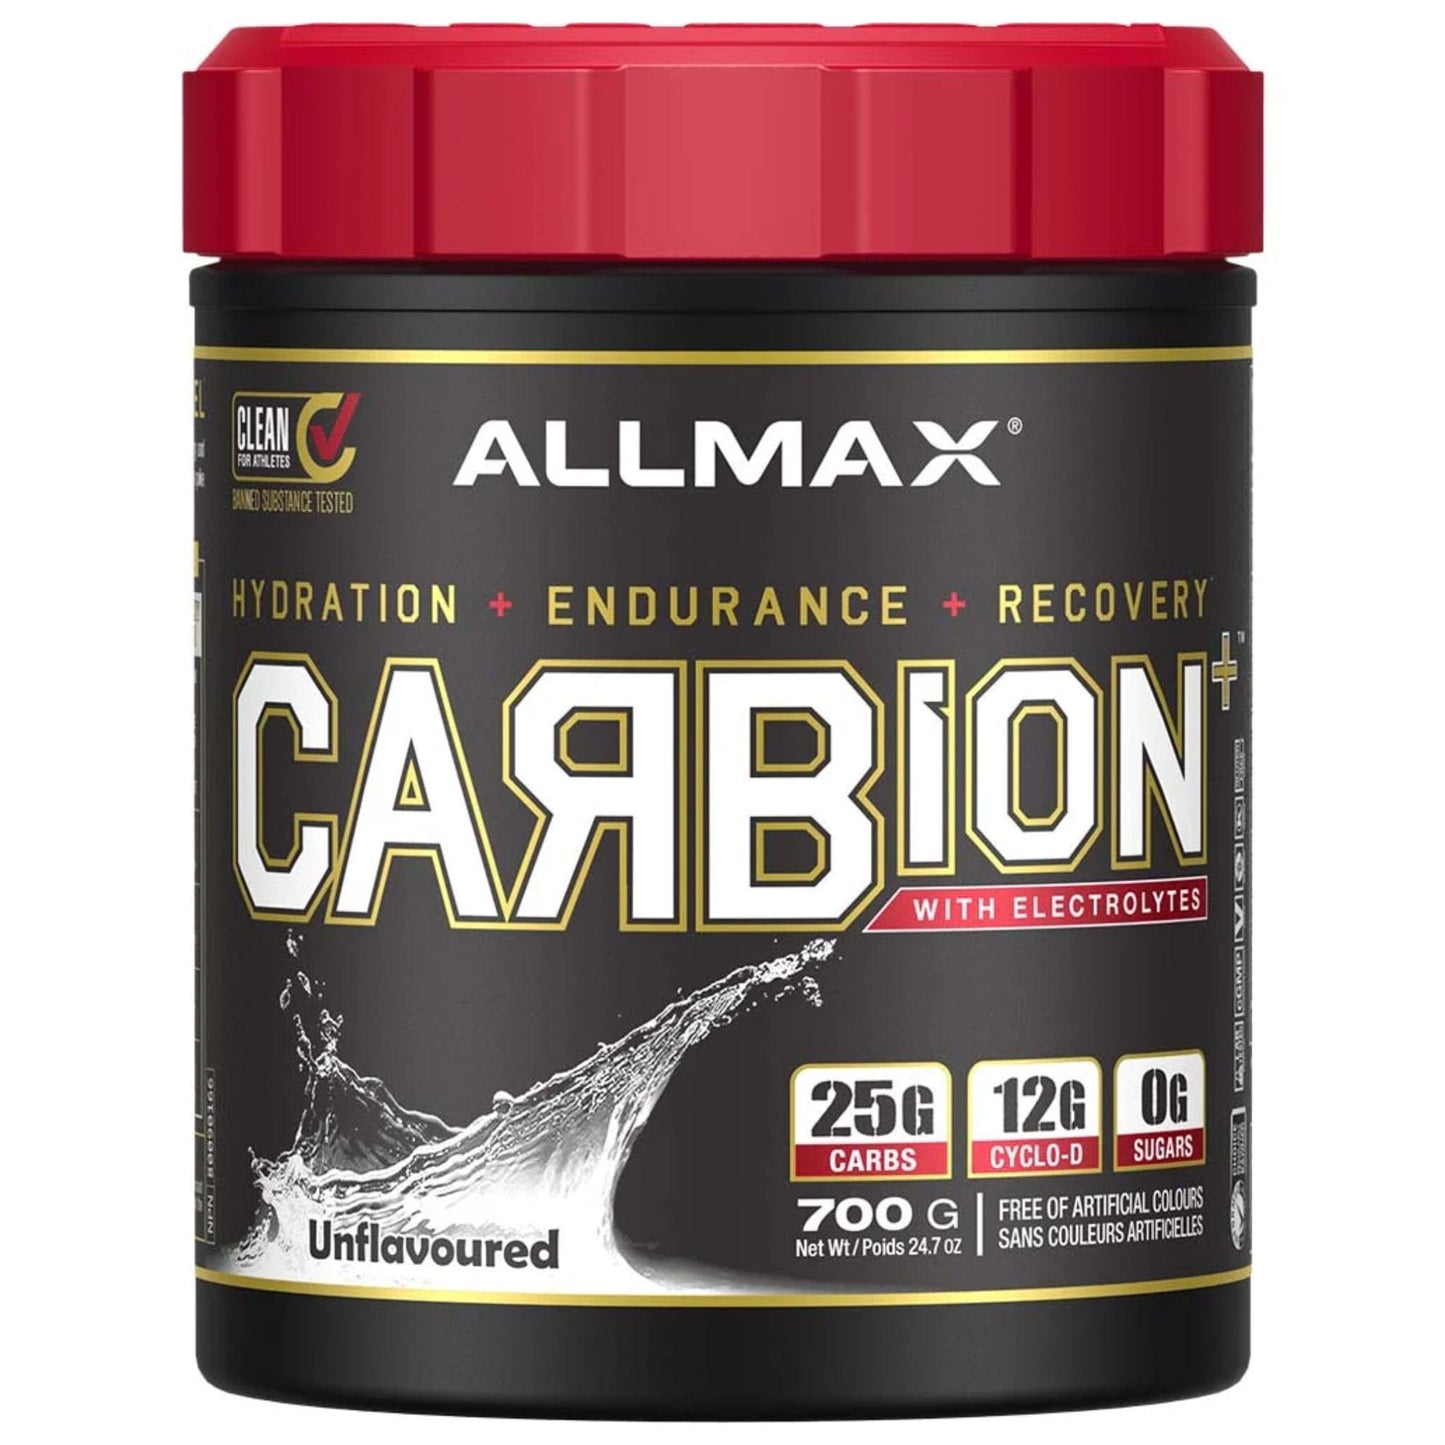 Unflavoured | Allmax Carbion with Electrolytes // unflavoured